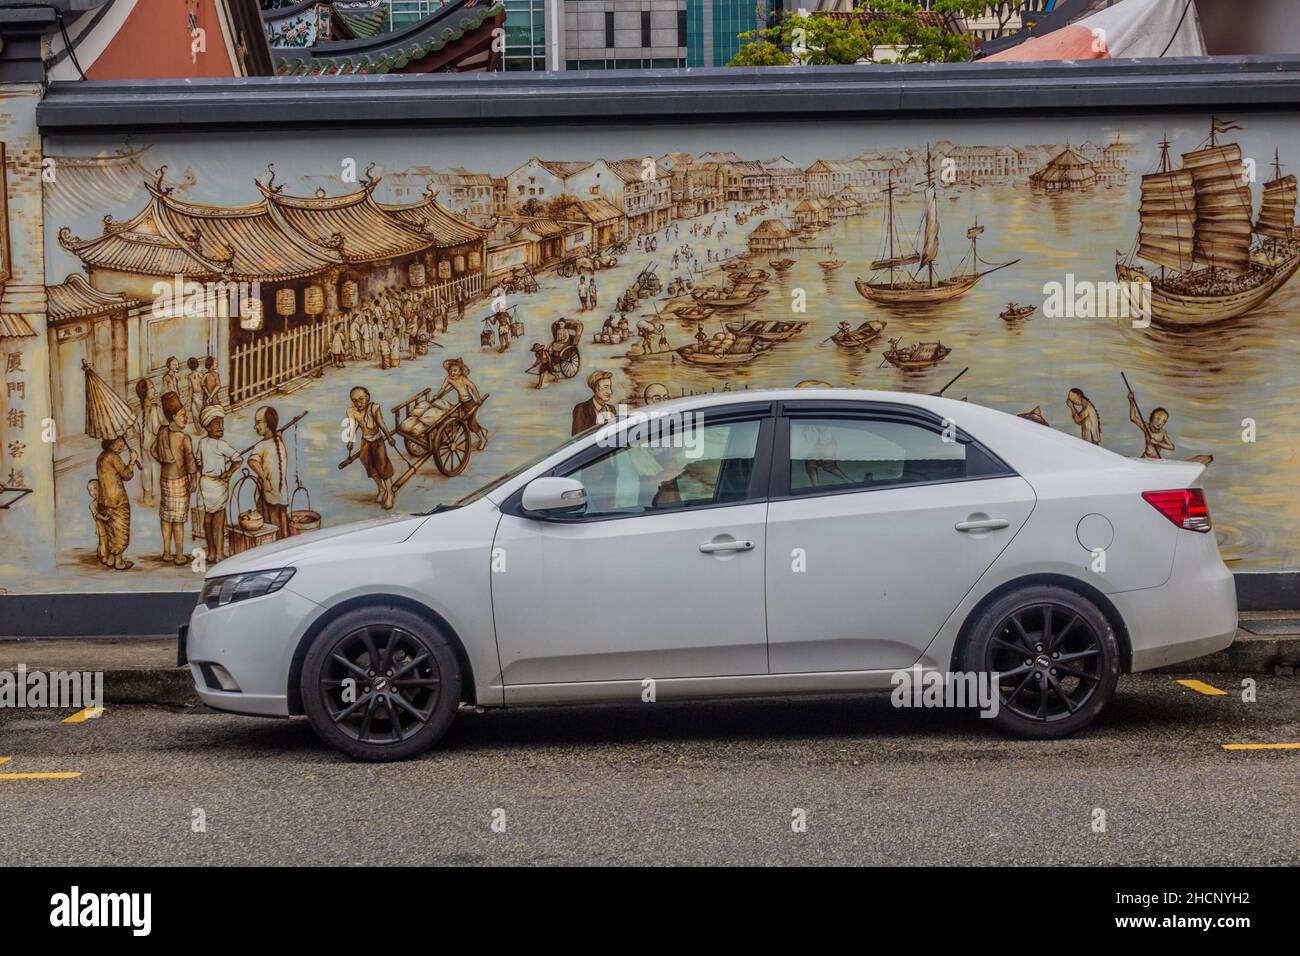 SINGAPORE, SINGAPORE - MARCH 12, 2018: Modern car in front of a wall painting of an old Singapore Stock Photo